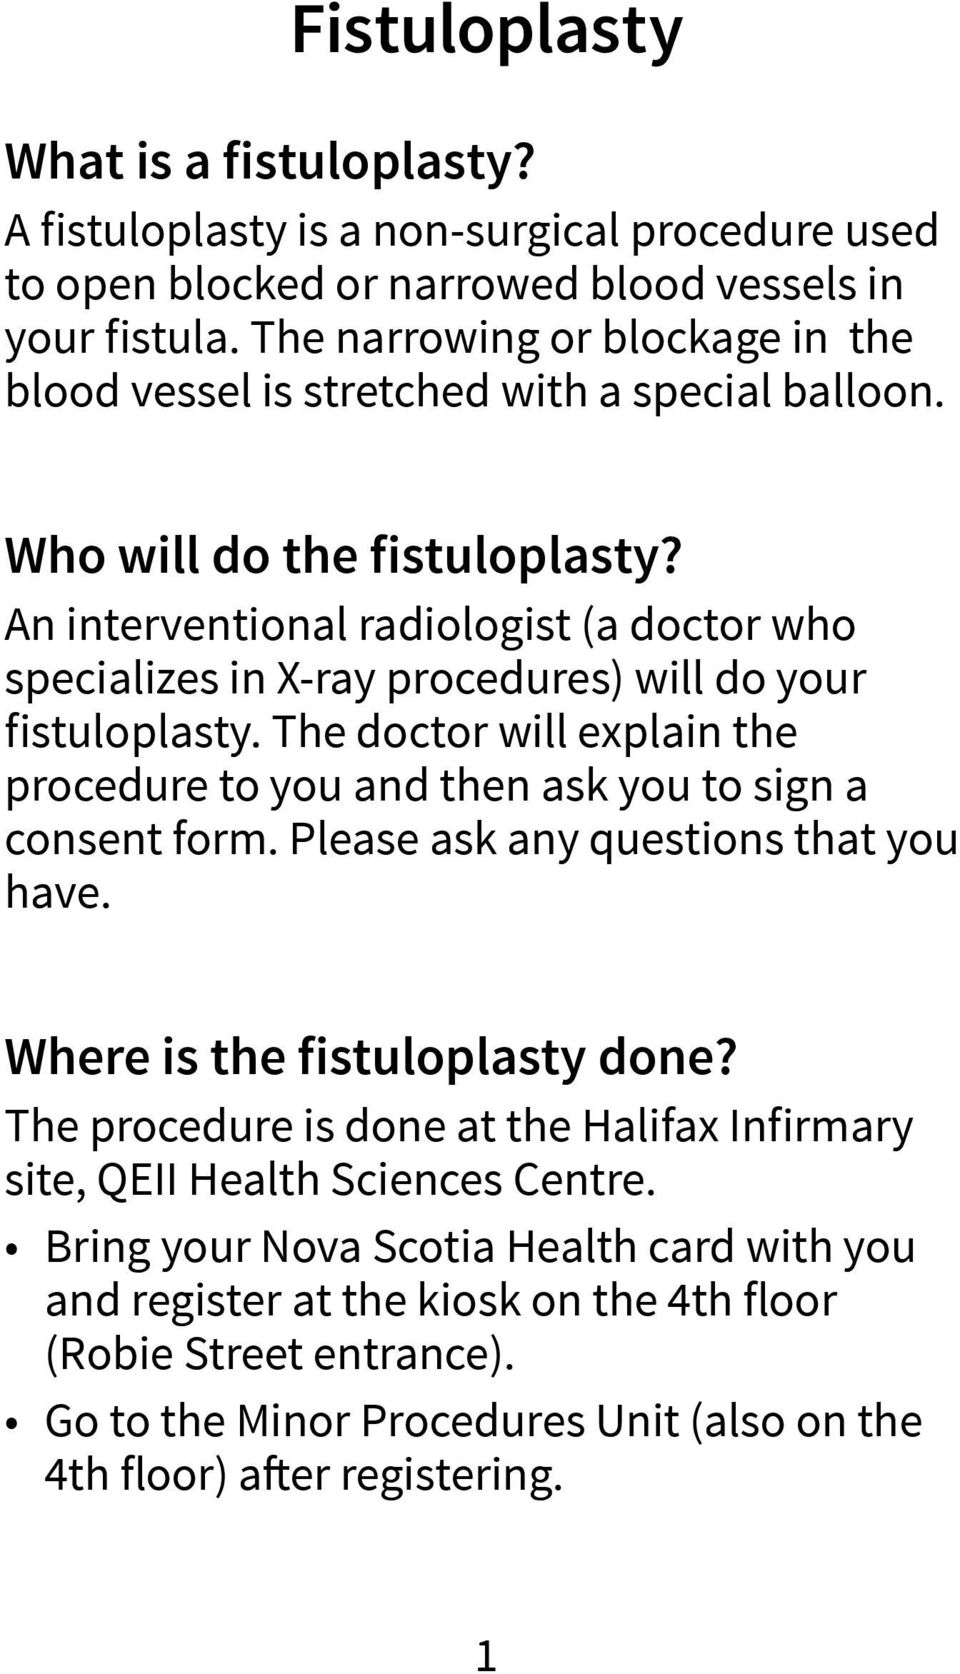 An interventional radiologist (a doctor who specializes in X-ray procedures) will do your fistuloplasty. The doctor will explain the procedure to you and then ask you to sign a consent form.